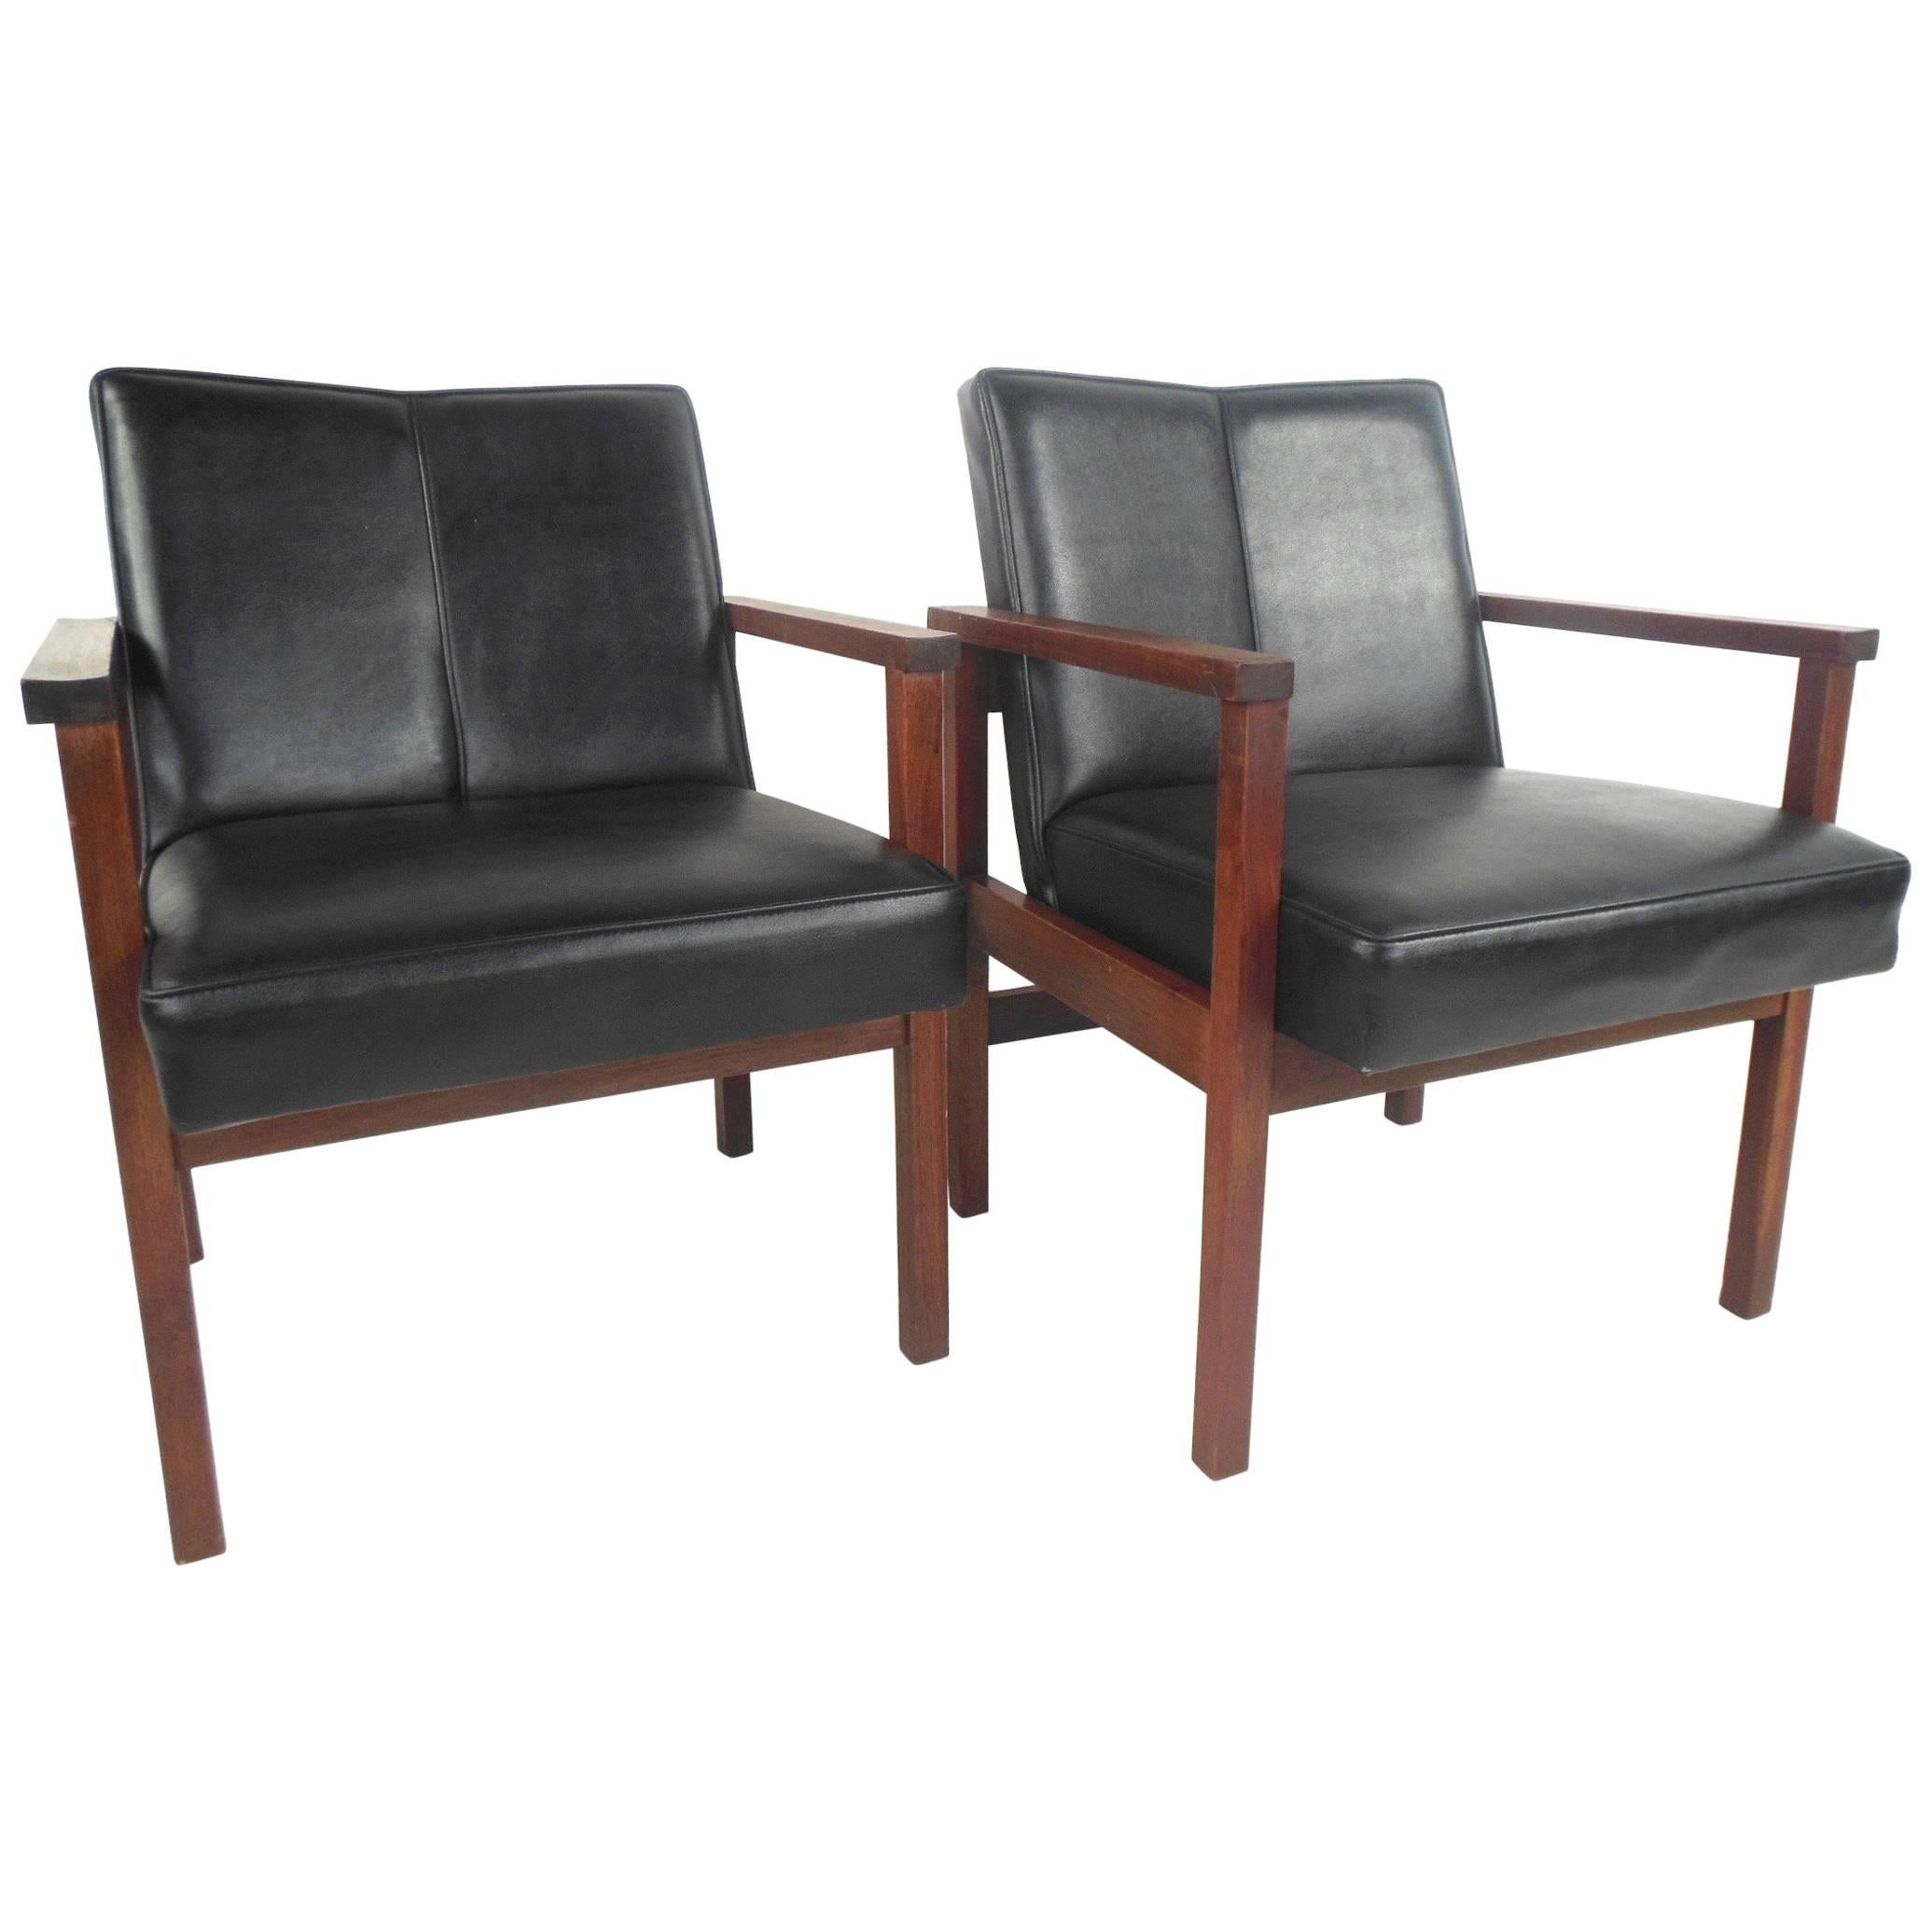 Pair of Mid-Century Modern Office Side Chairs